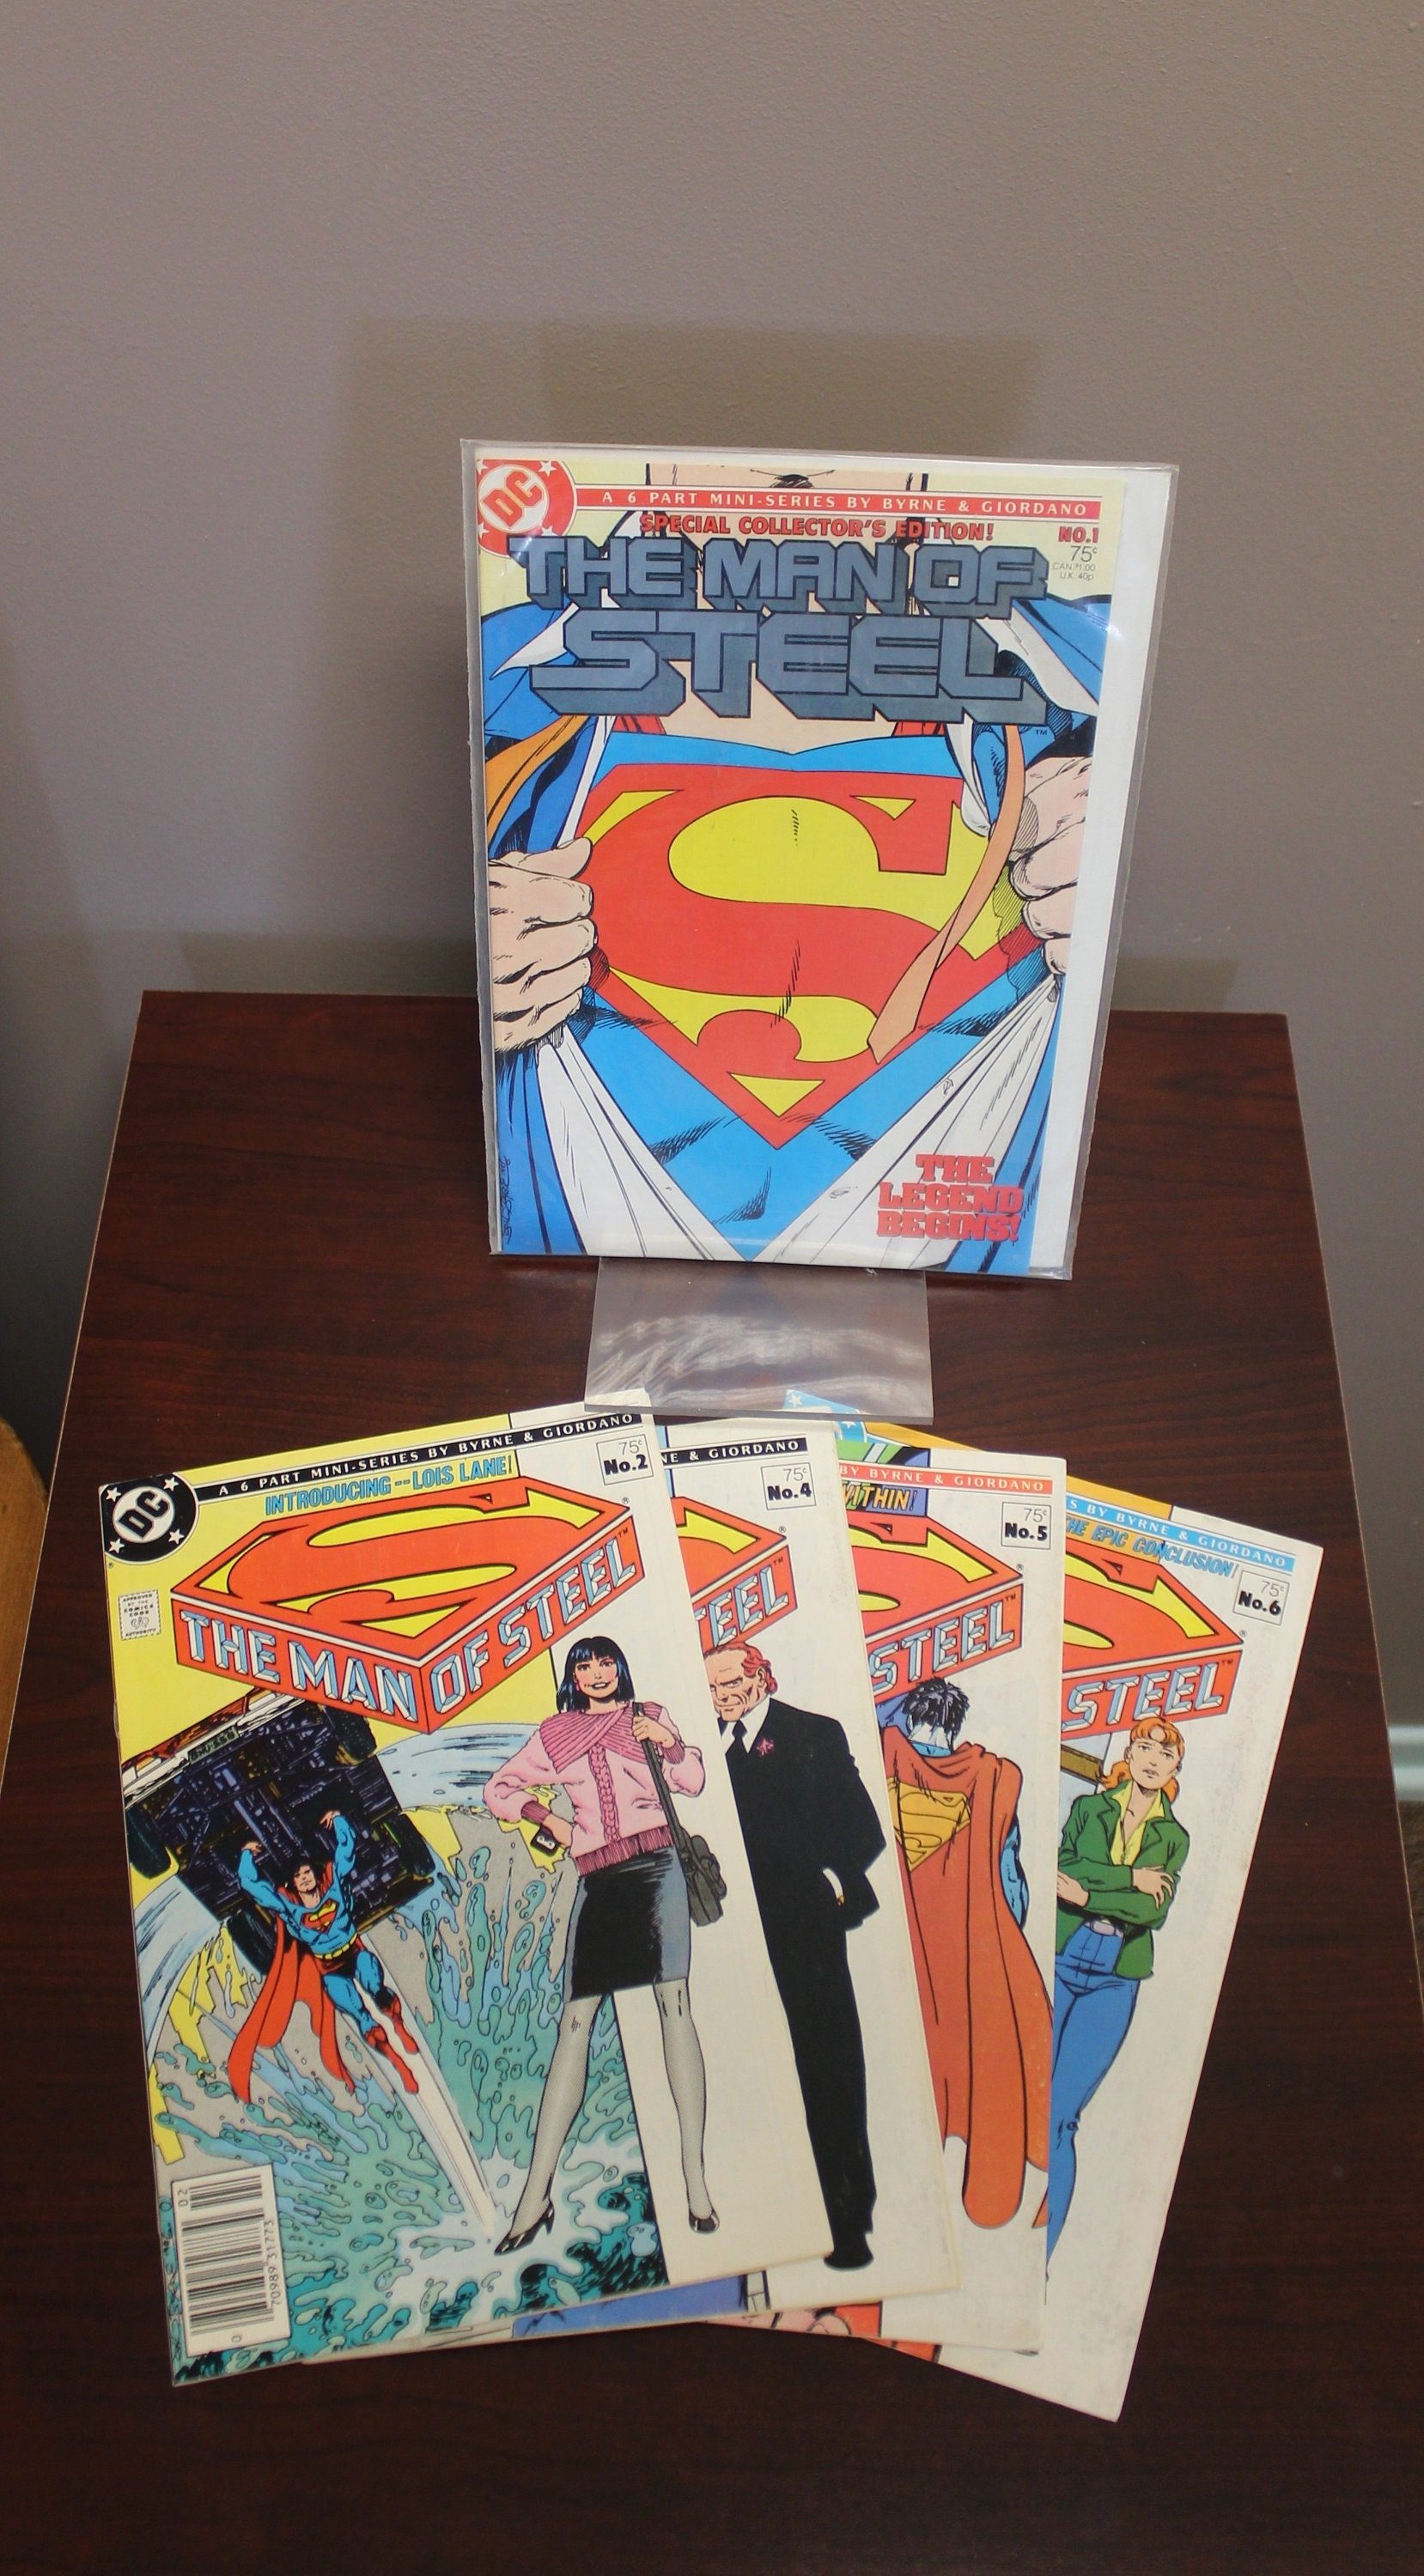 The Man of Steel (Comic) 1986, No. 2 (Introducing Lois Lane)